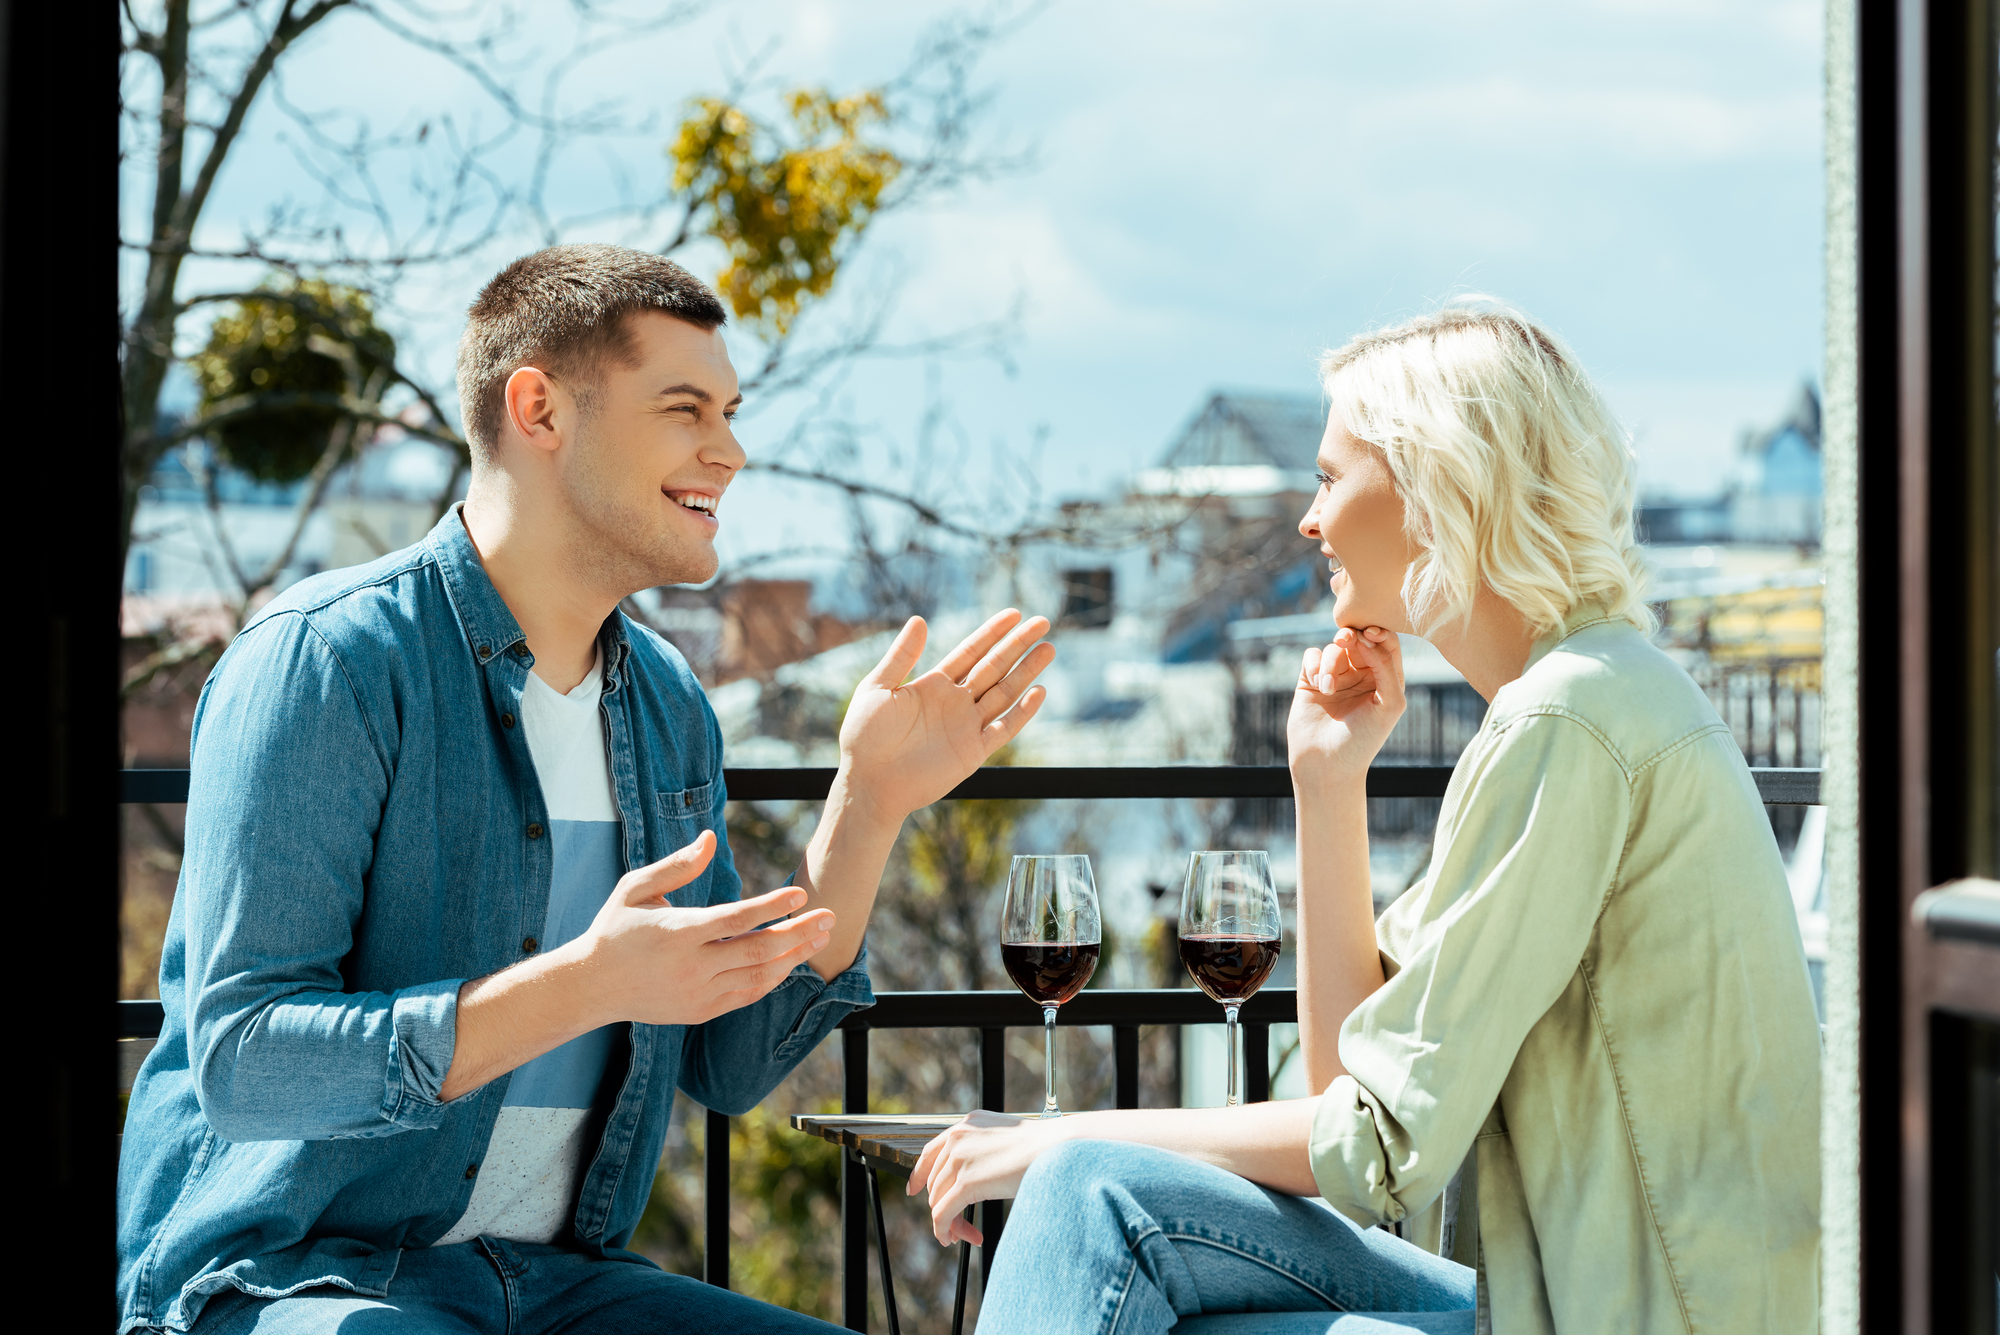 Two people sit on a balcony, engaged in a lively conversation. They are facing each other, smiling and gesturing with their hands. Two glasses of red wine are on a small table between them. The background shows trees and rooftops under a partly cloudy sky.